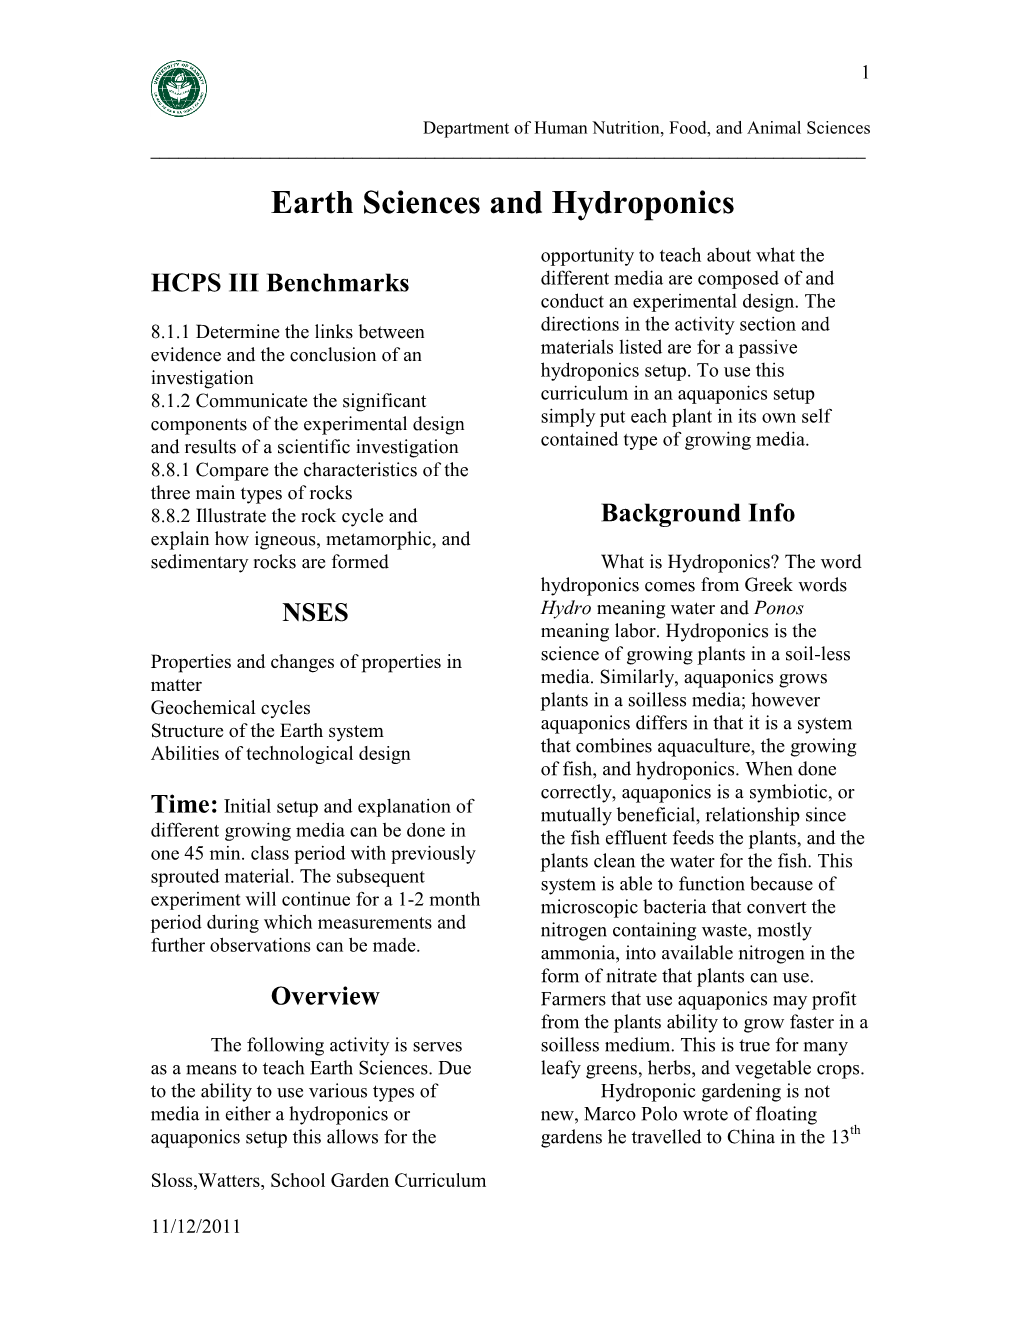 Earth Sciences and Hydroponics